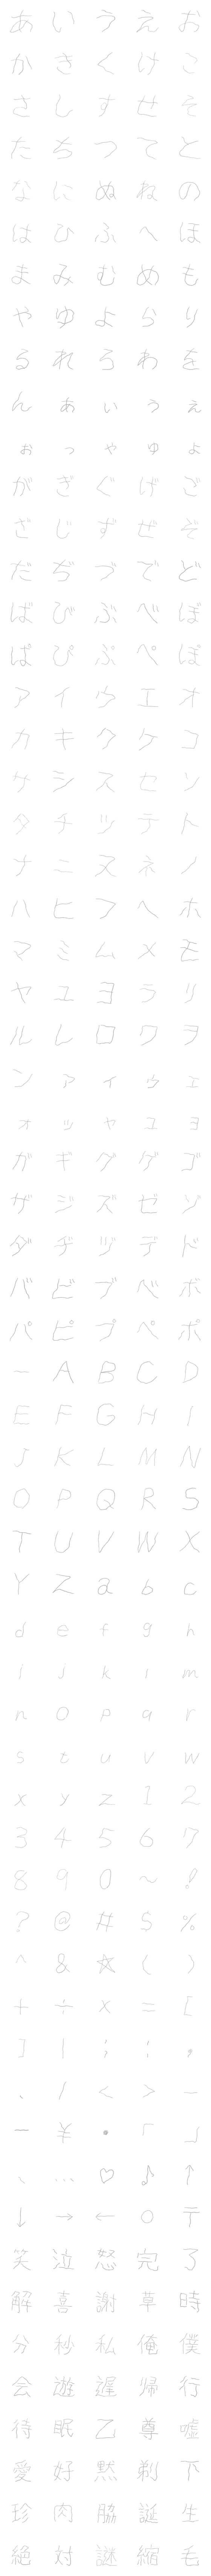 [LINE絵文字]毛文字の画像一覧